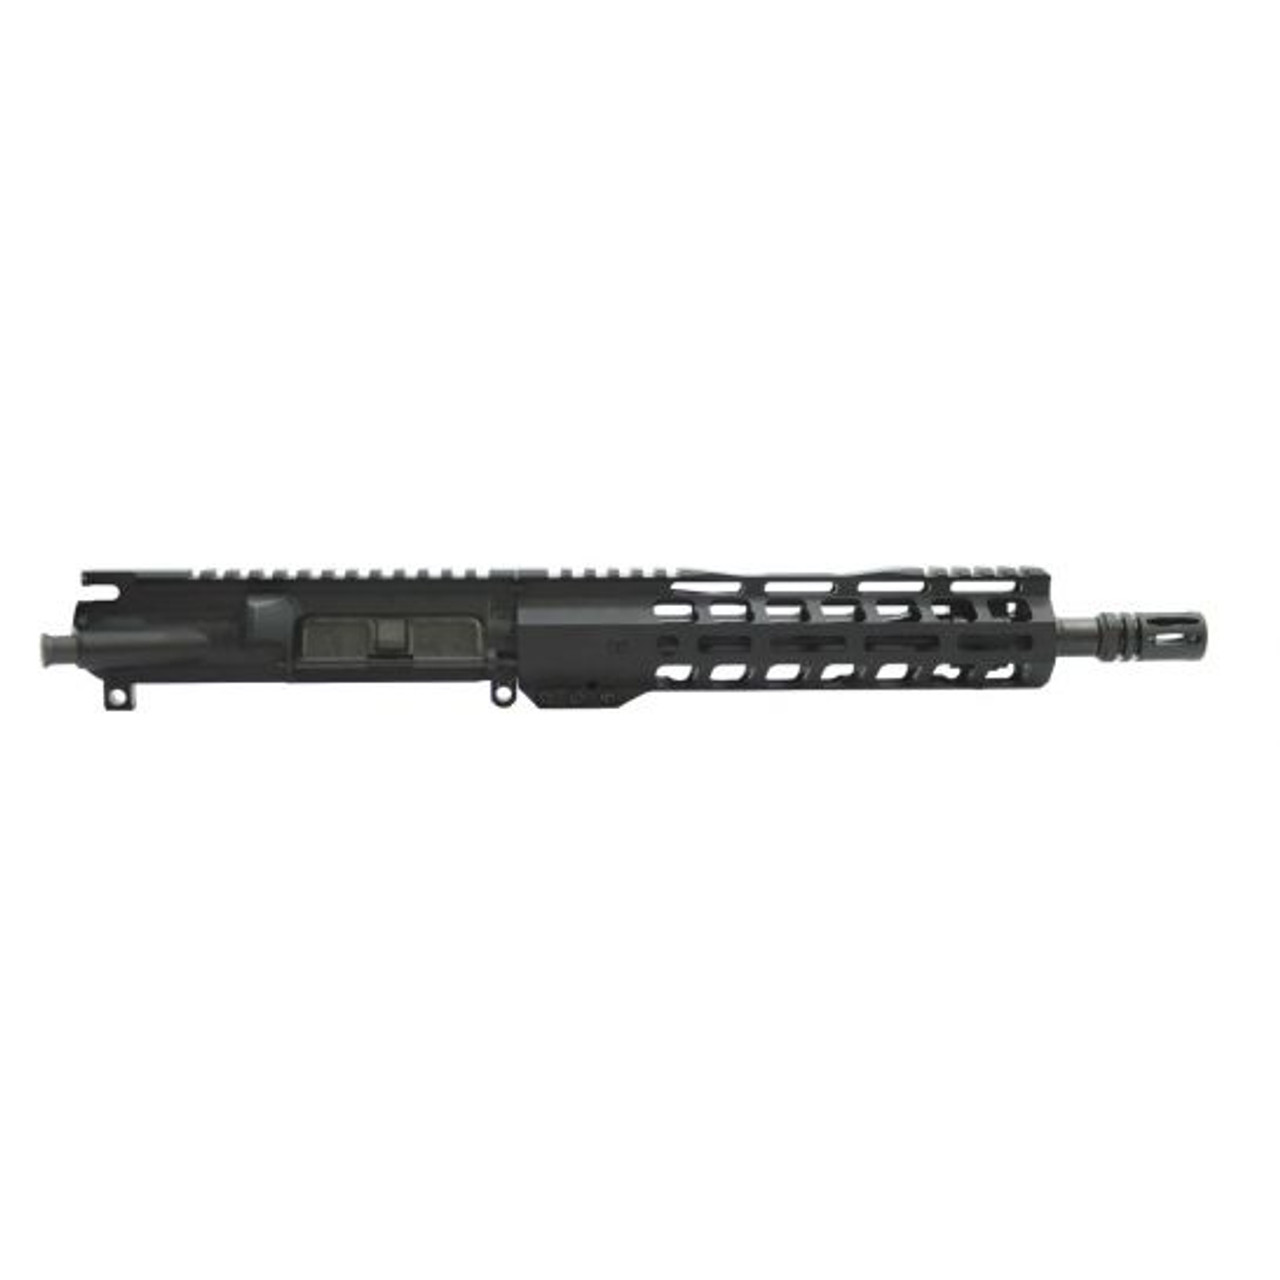 PSA 10.5" CHF CARBINE LENGTH 5.56 NATO 1:7 9'' LIGHTWEIGHT M-LOK RAILED UPPER - WITHOUT BCG OR CH